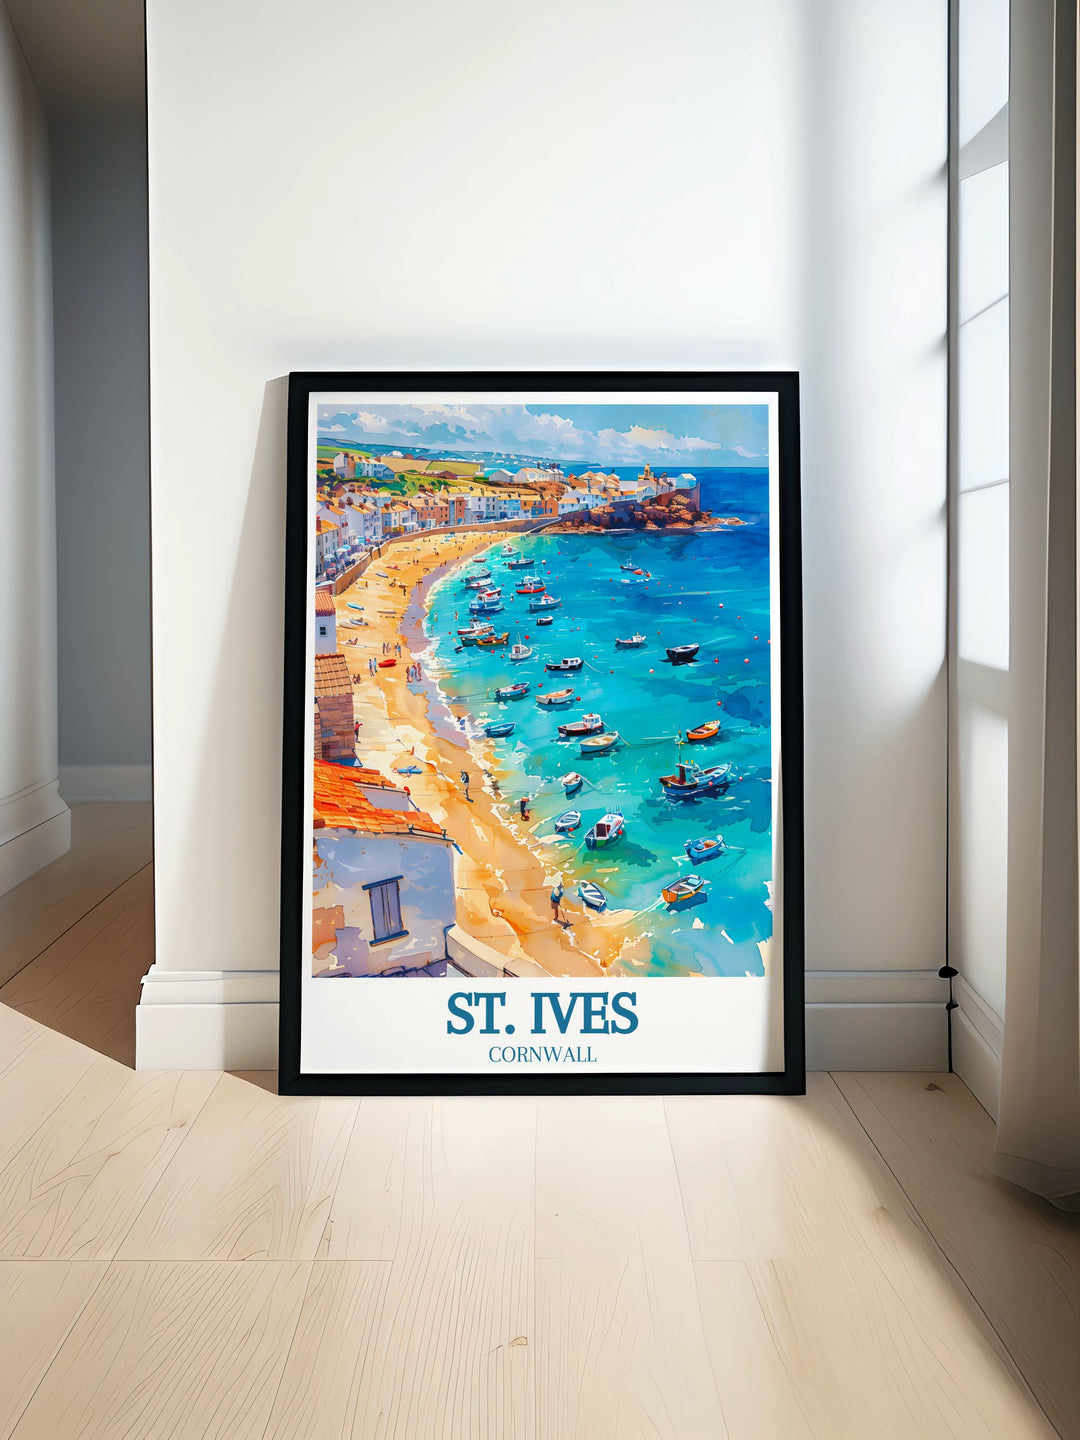 This poster of St. Ives and Porthmeor Beach celebrates the unique blend of history, culture, and natural beauty that defines this beloved Cornish destination.